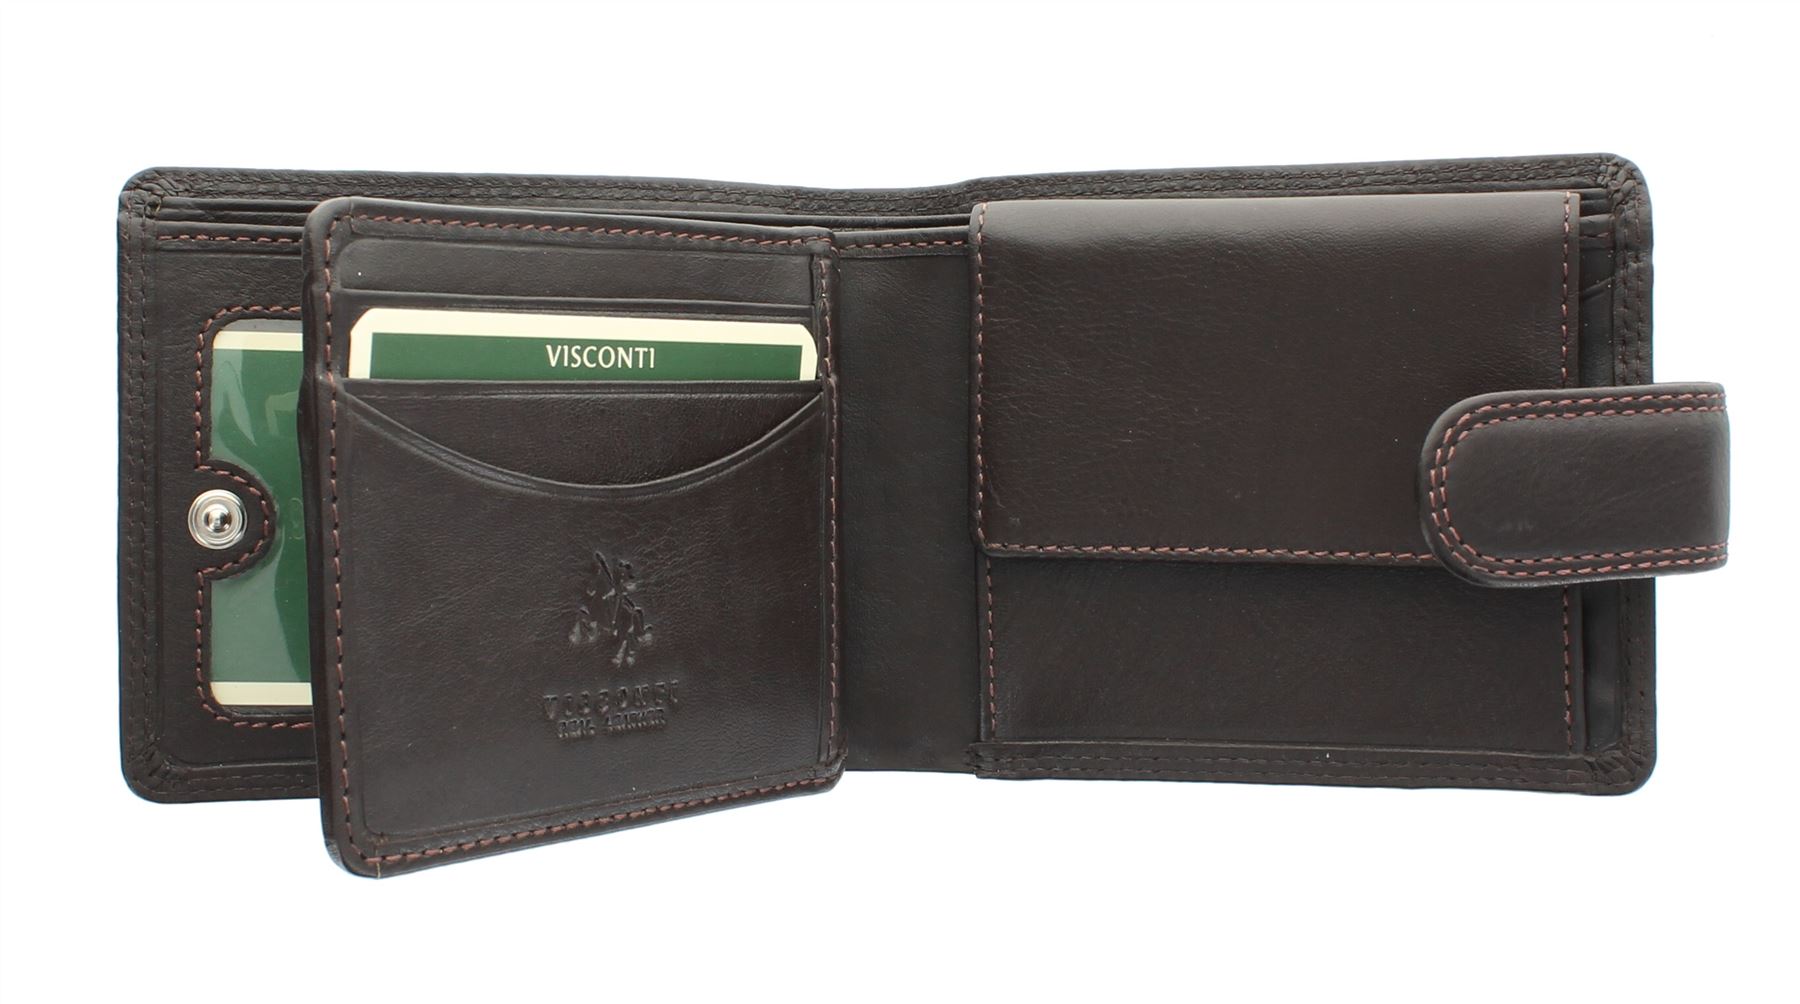 Visconti Heritage Collection KNIGHTSBRIDGE Leather Wallet With Tab Closure  RFID blocking HT10